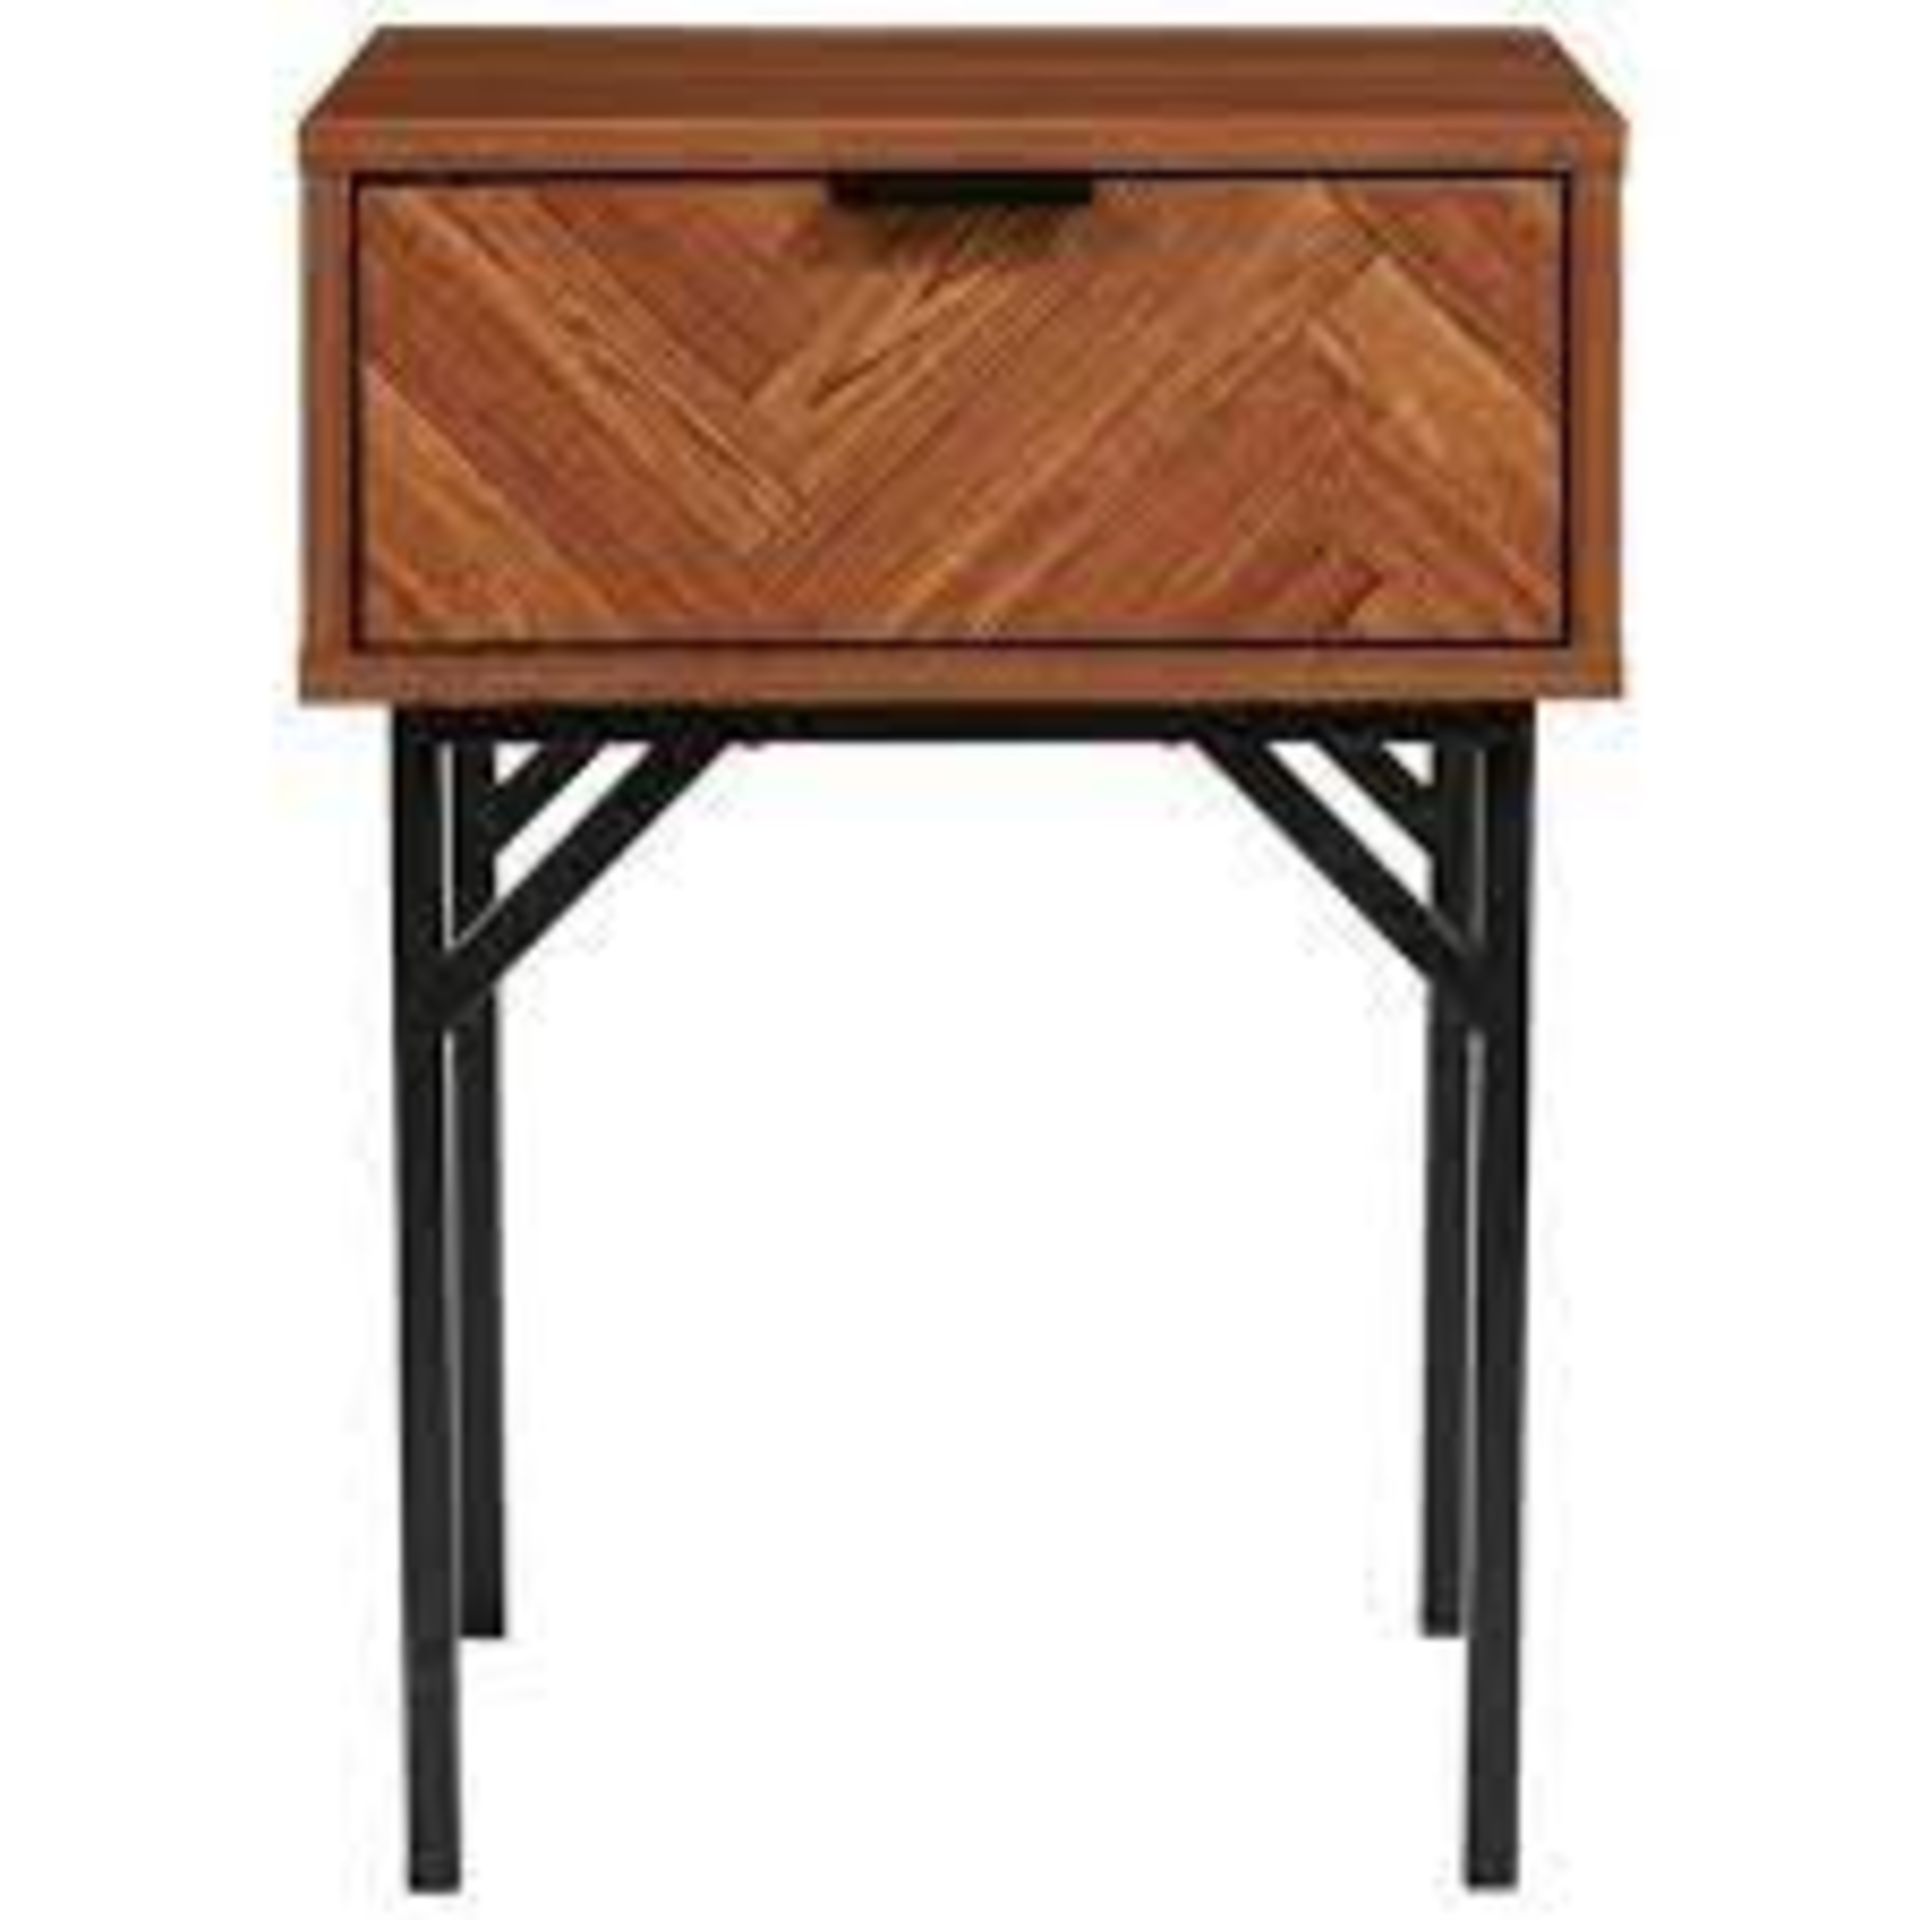 Lloyd Pascal 1 Drawer Table in Dark Chevron. RRP £69. Boxed & unchecked